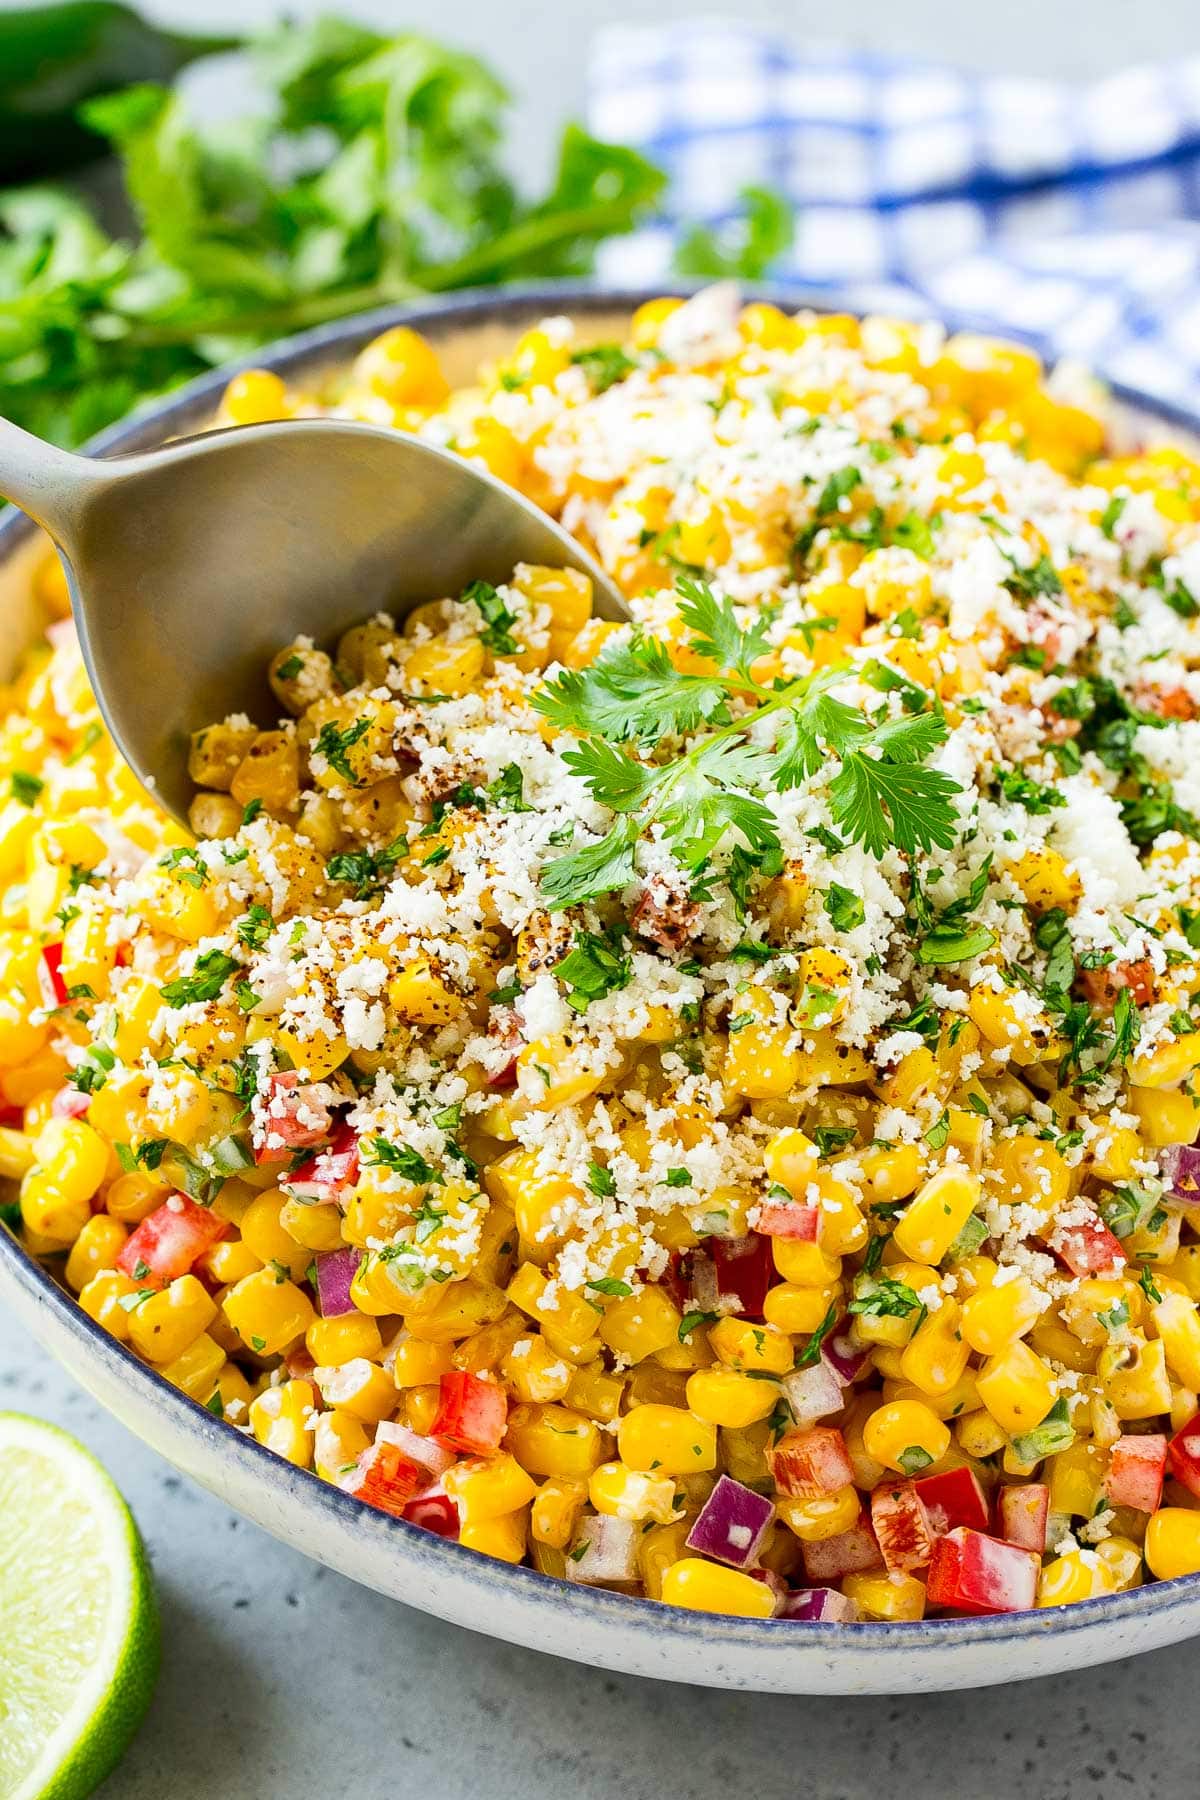 A serving spoon in a bowl of Mexican corn salad.